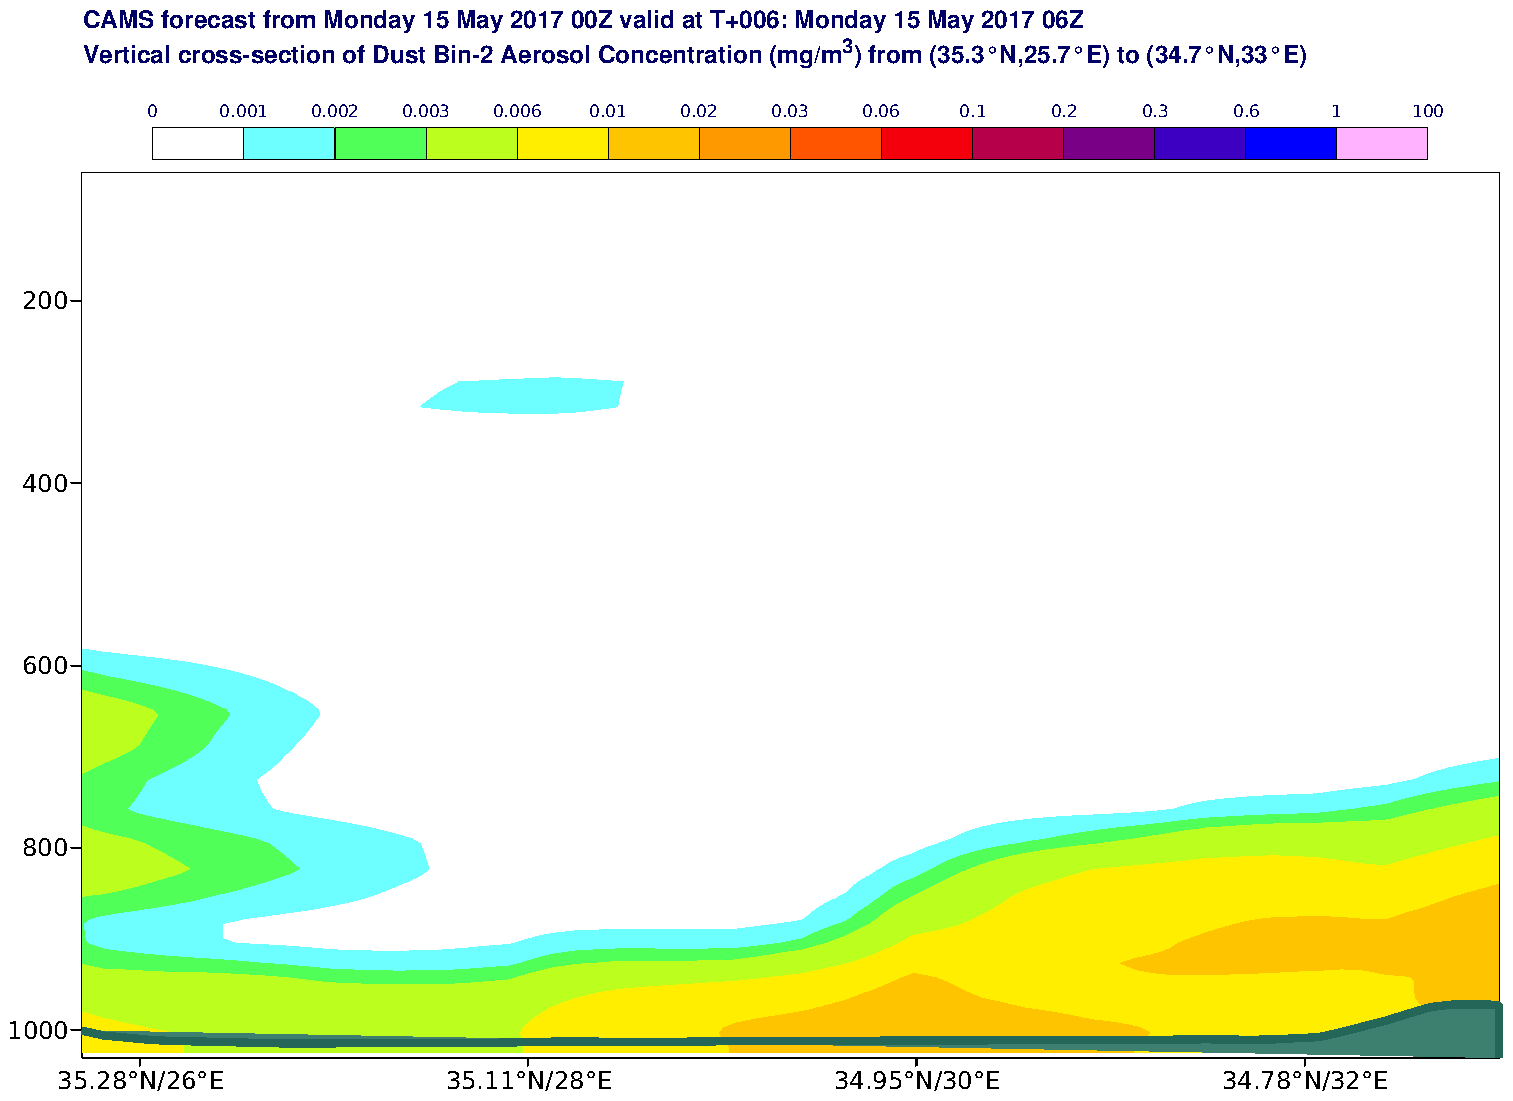 Vertical cross-section of Dust Bin-2 Aerosol Concentration (mg/m3) valid at T6 - 2017-05-15 06:00